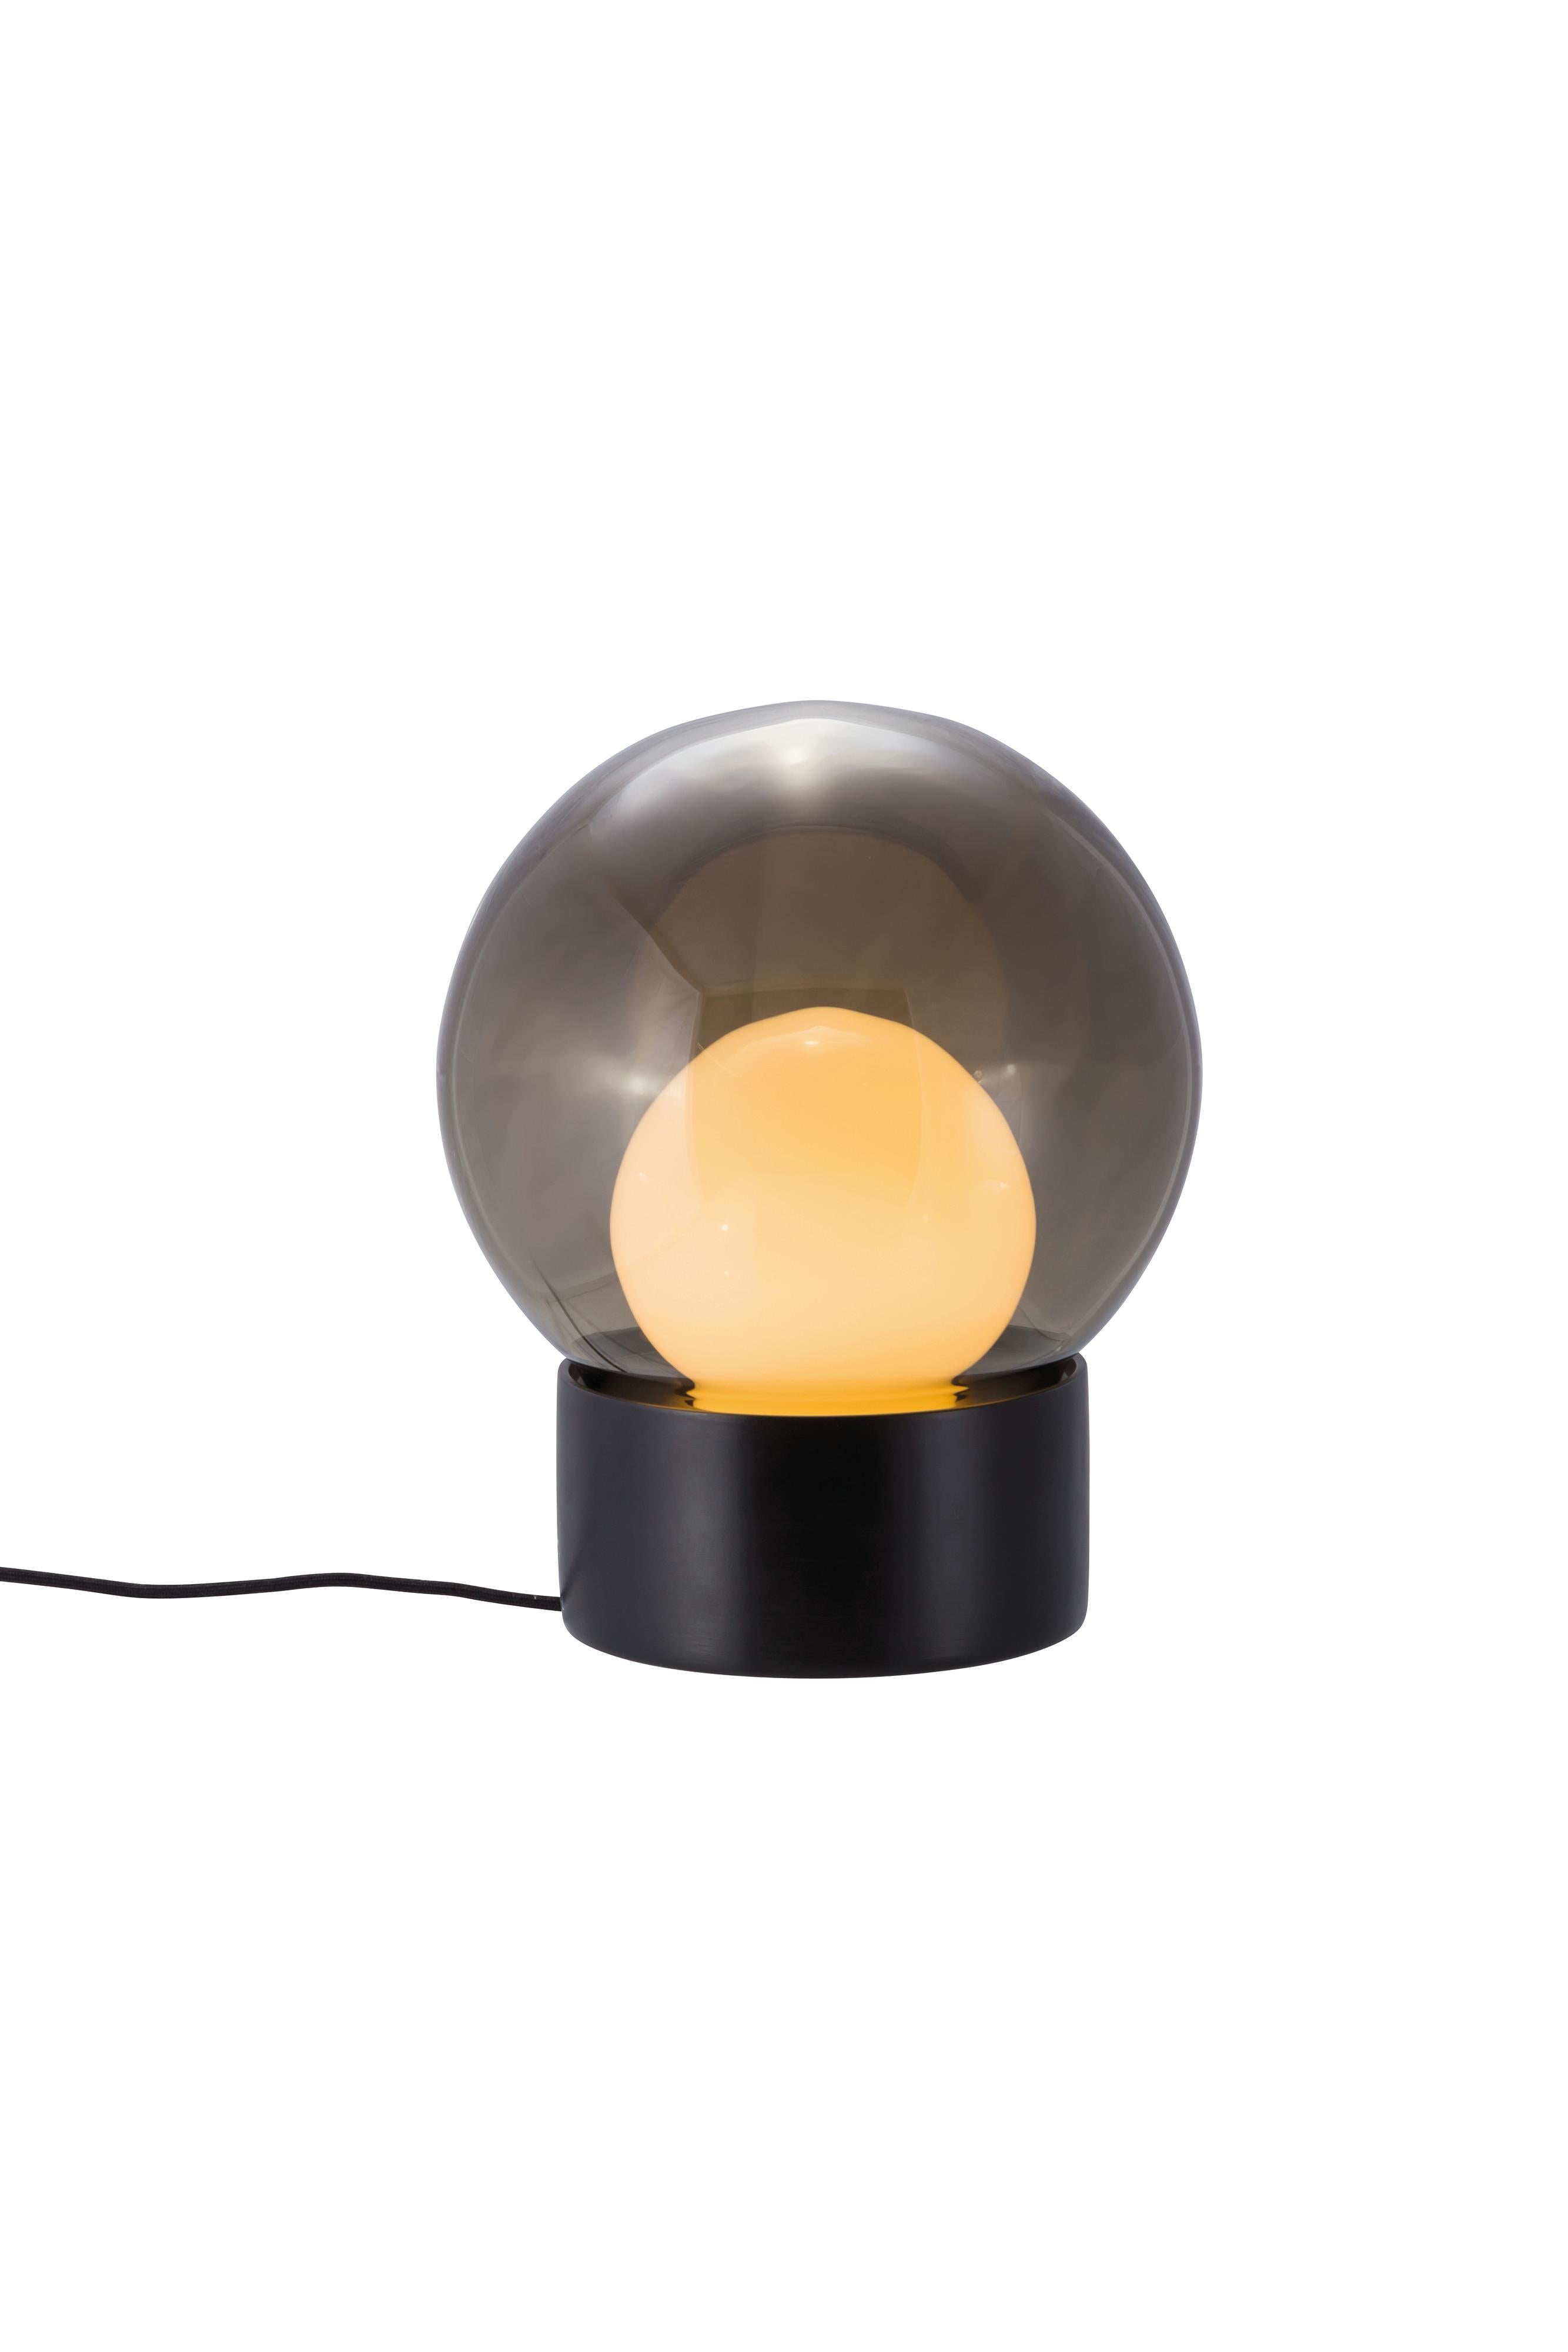 Boule small smoky grey opal white black table lamp by Pulpo
Dimensions: D29 x H35.5 cm
Materials: ceramic, handblown glass, coloured, textile.

Also available in different finishes: transparent opal white black, transparent smoky grey black,